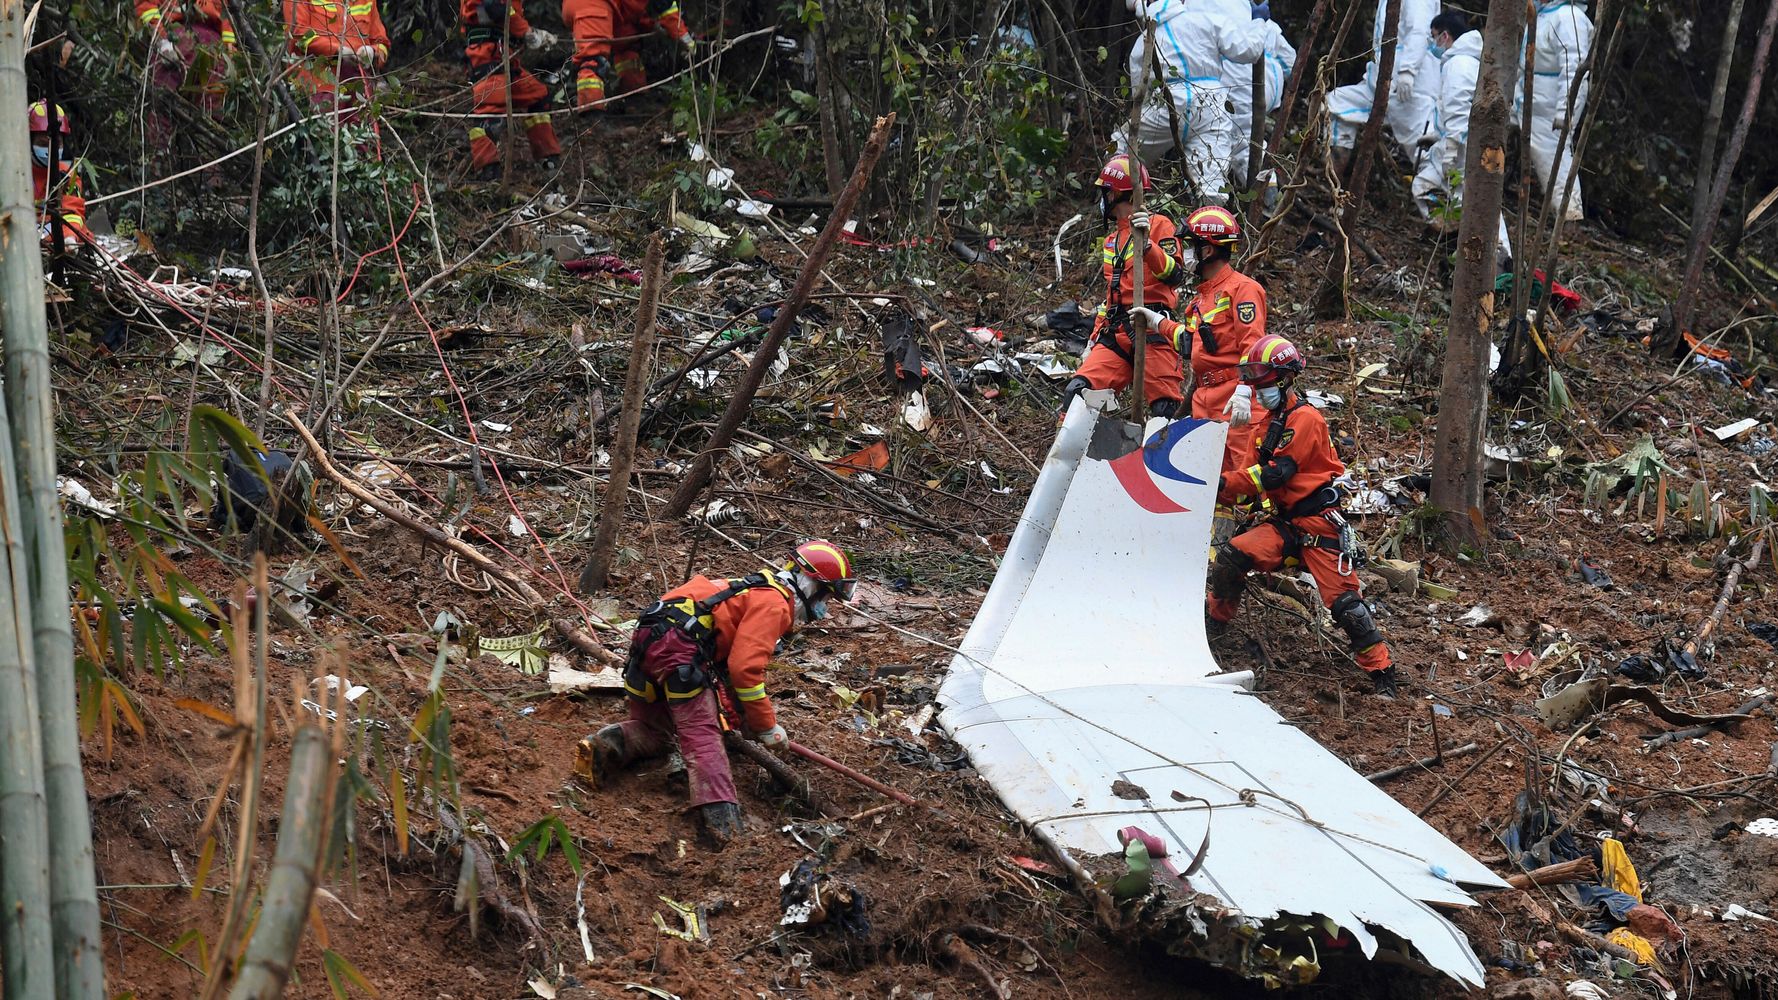 China Eastern Plane Crash Could Have Been Intentional, U.S. Officials Find: Report